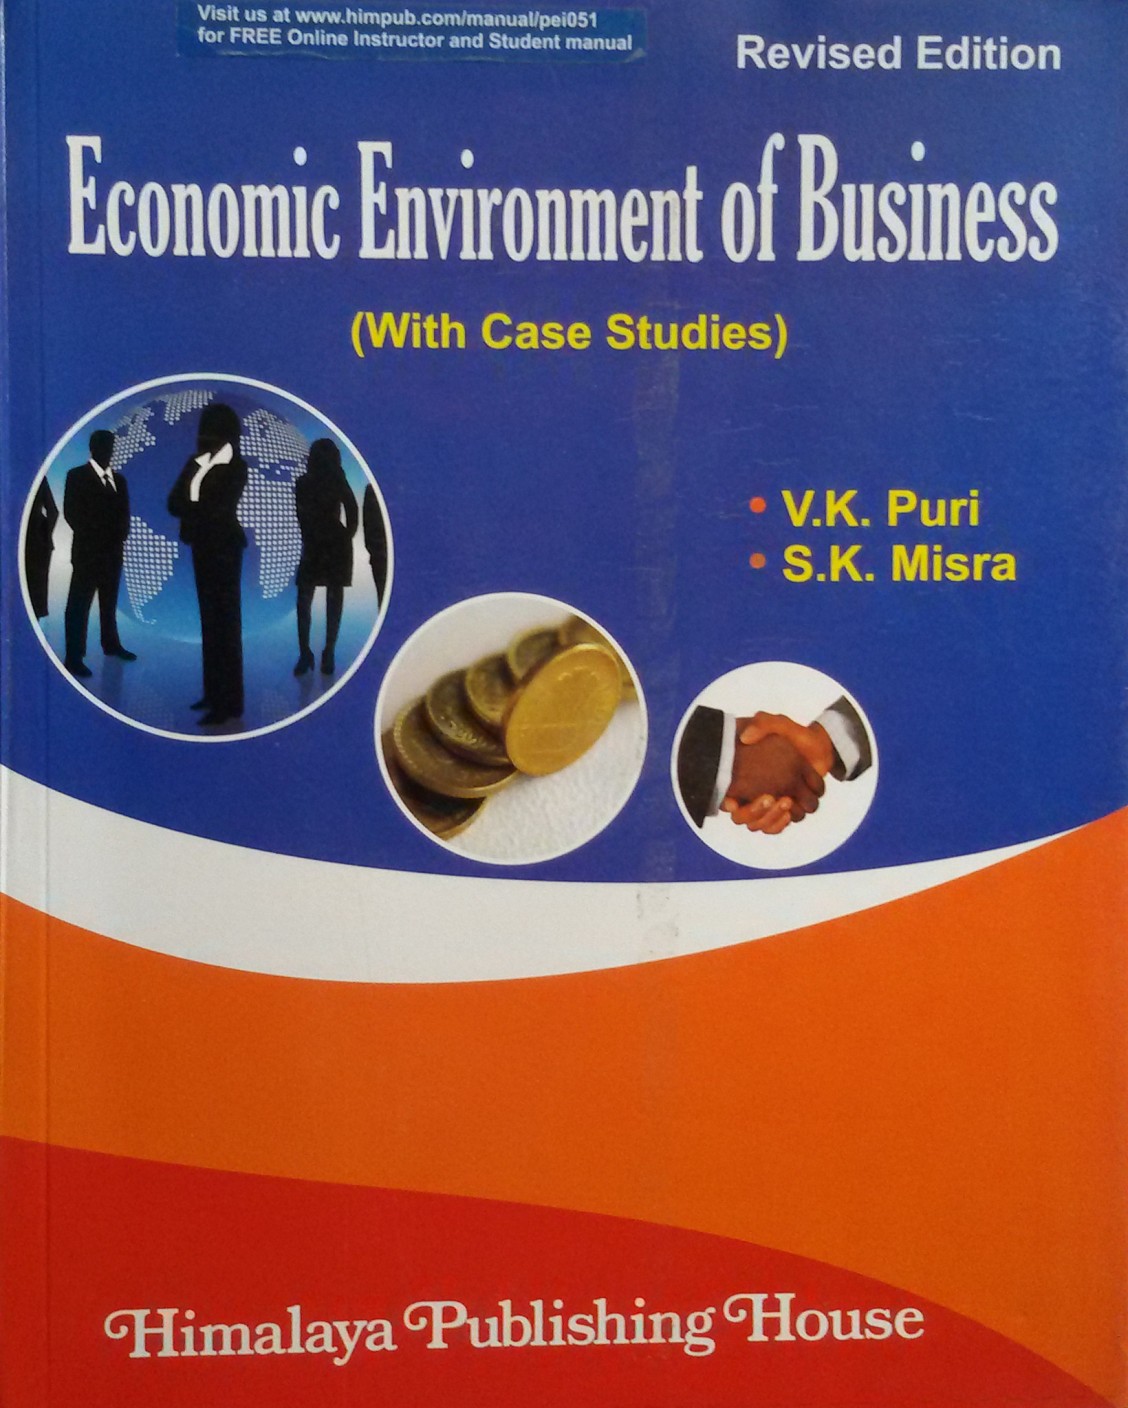 case study on environment of business